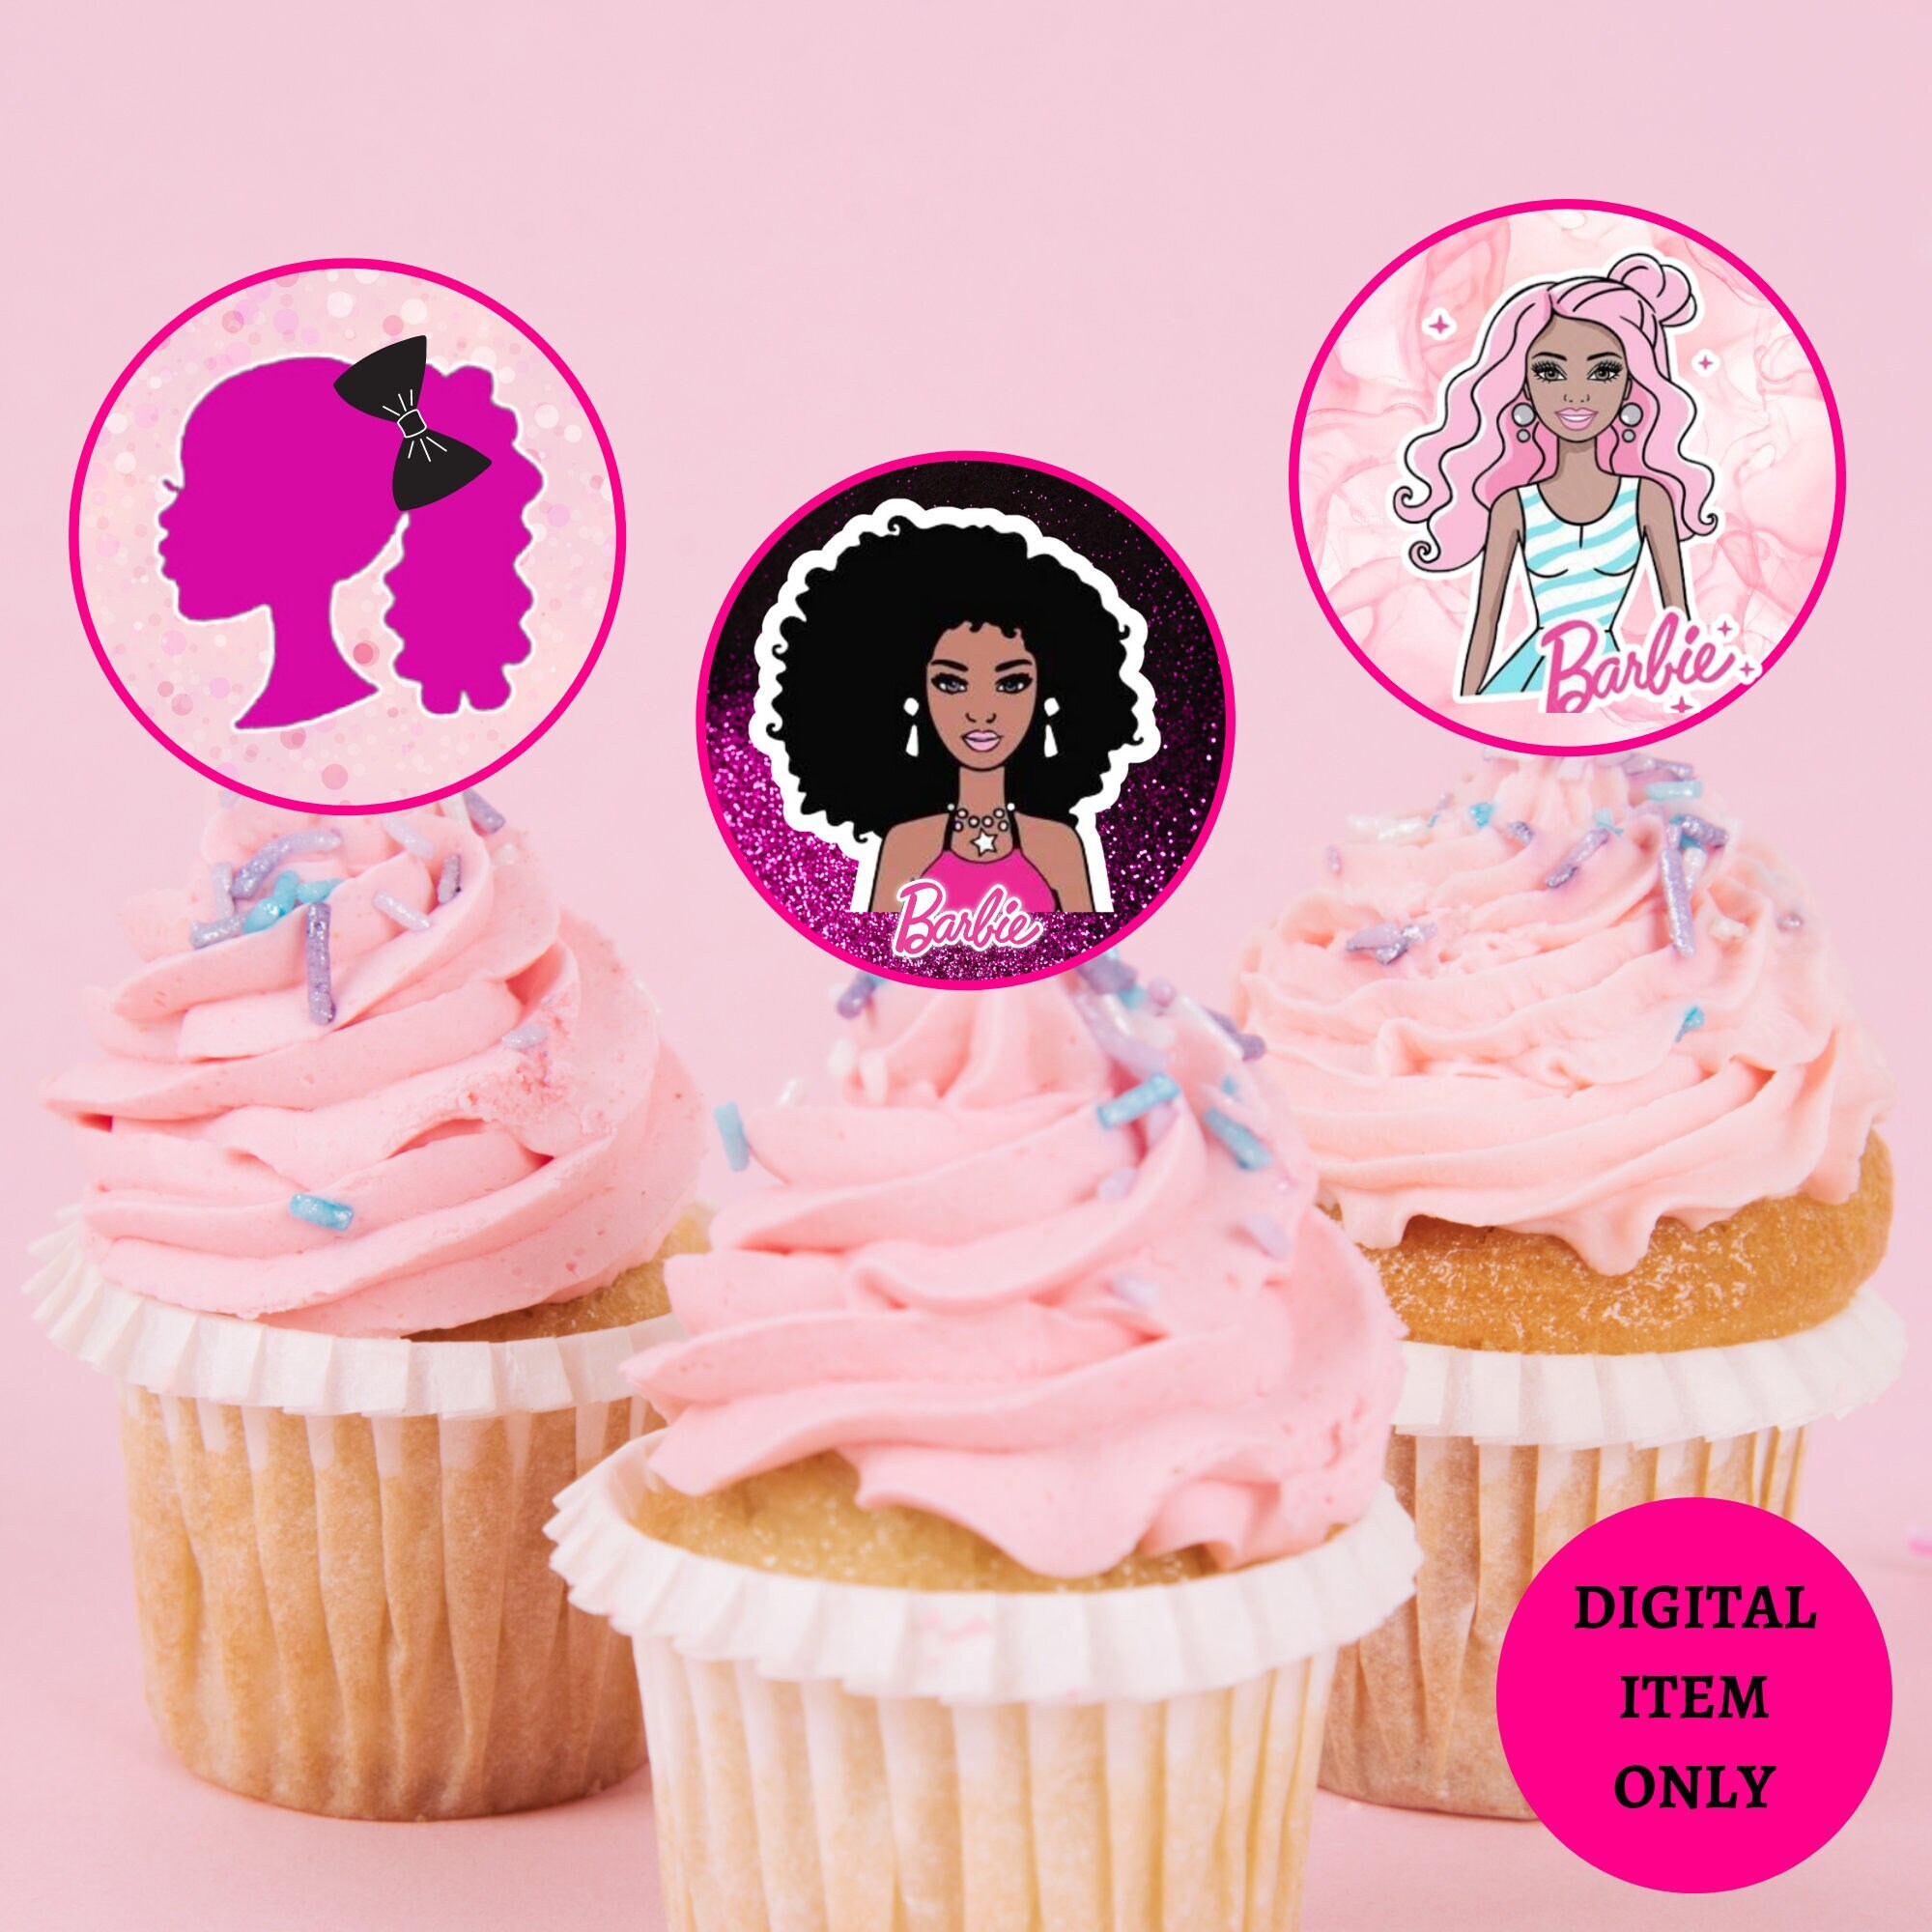 30 x Barbie Head Edible Cupcake PRE-CUT Toppers Birthday Party Decoration